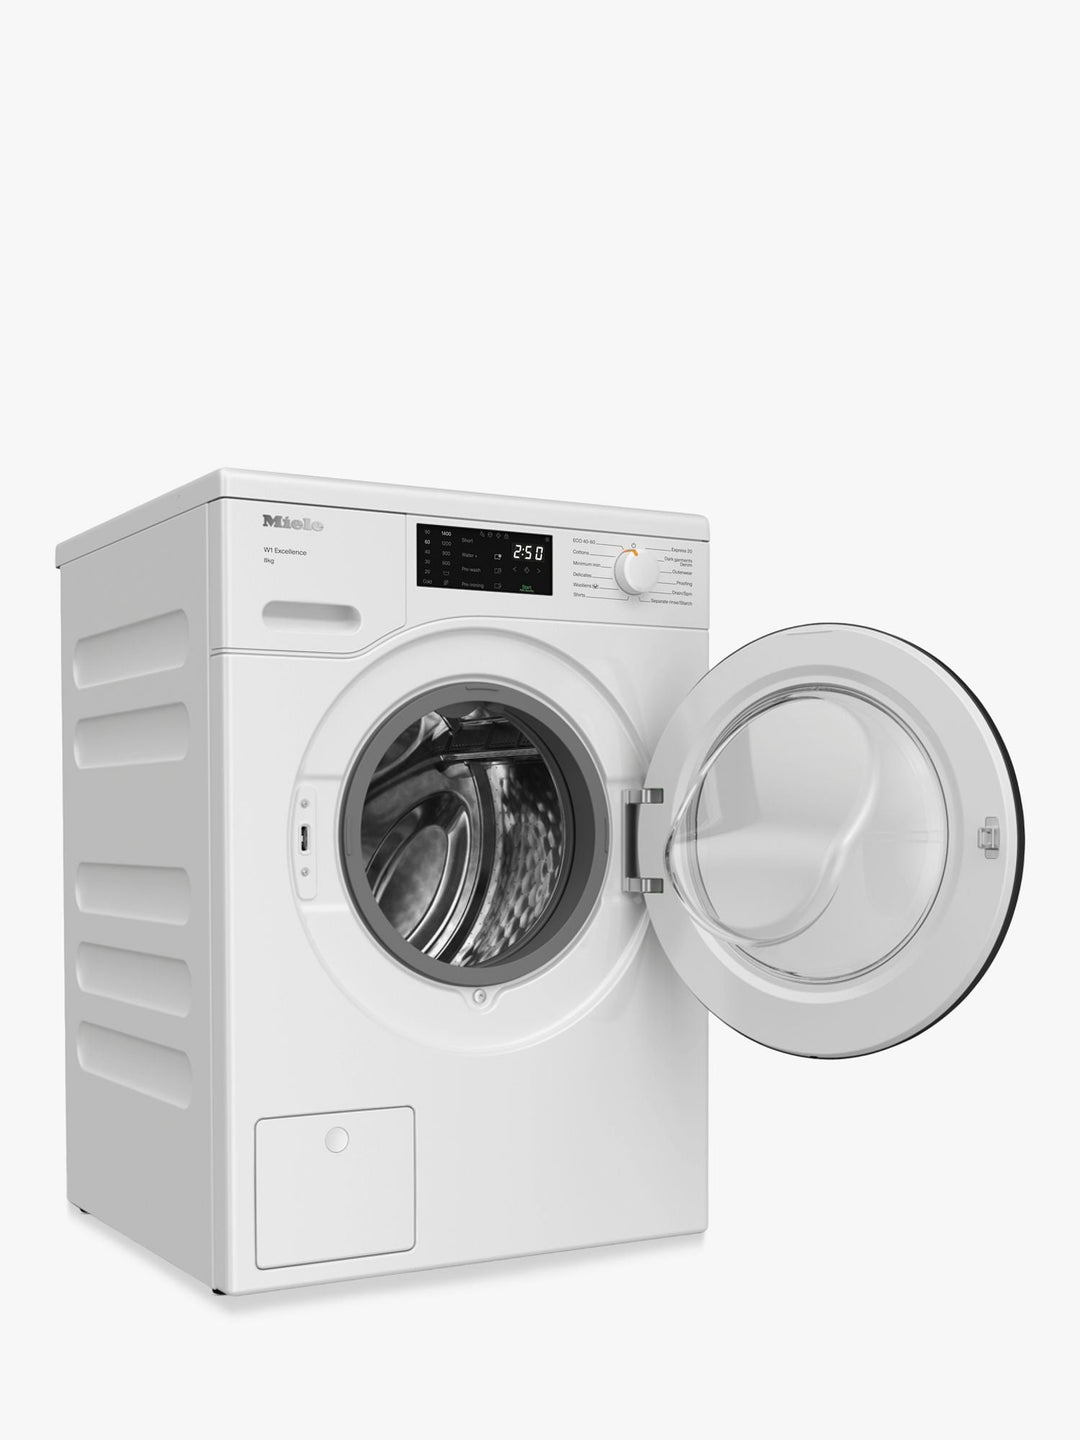 Miele WED025 WCS Freestanding Washing Machine, 8kg Load, 1400rpm Spin, White